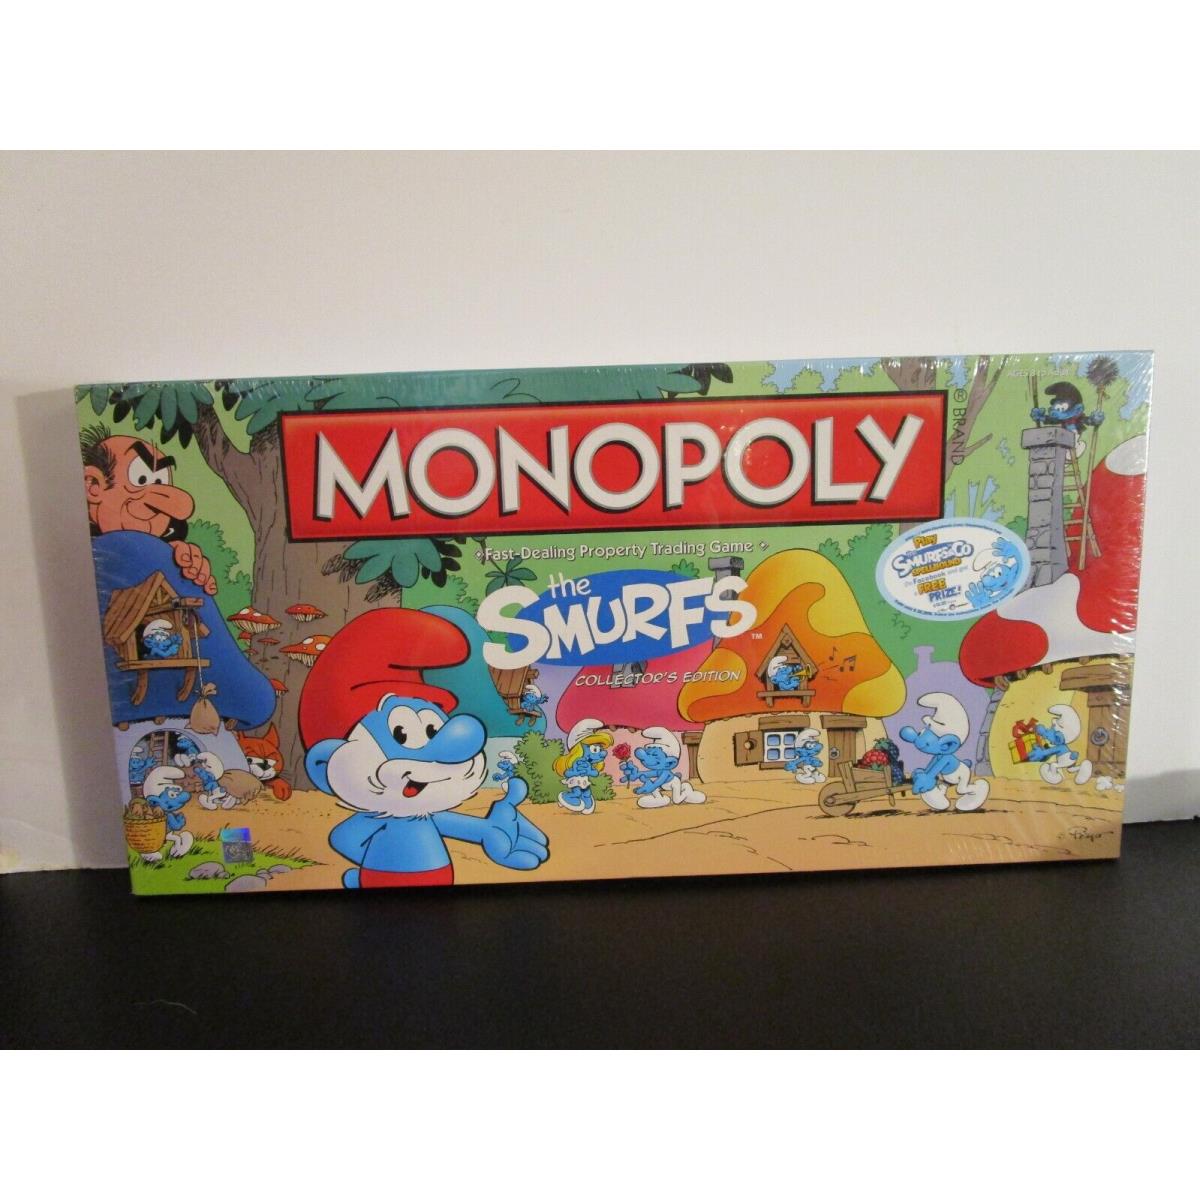 Monopoly: The Smurfs Collector`s Edition 2013 Sticker ON Box Shrink-wrapped